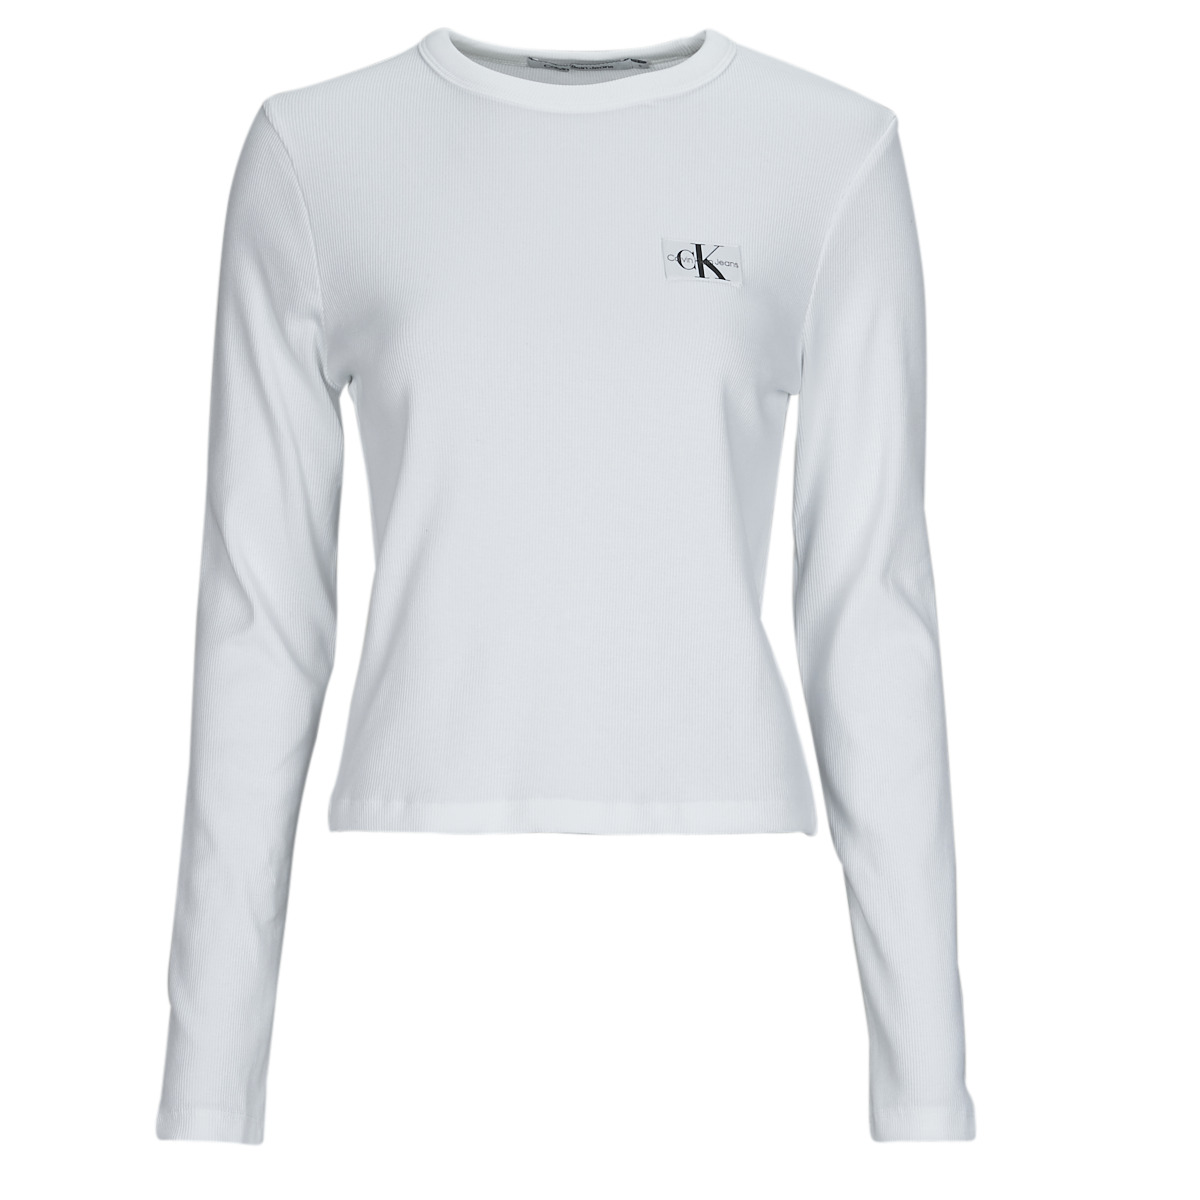 Calvin Klein Jeans WOVEN LABEL RIB LONG SLEEVE White - Free delivery |  Spartoo NET ! - Clothing Long sleeved shirts Women